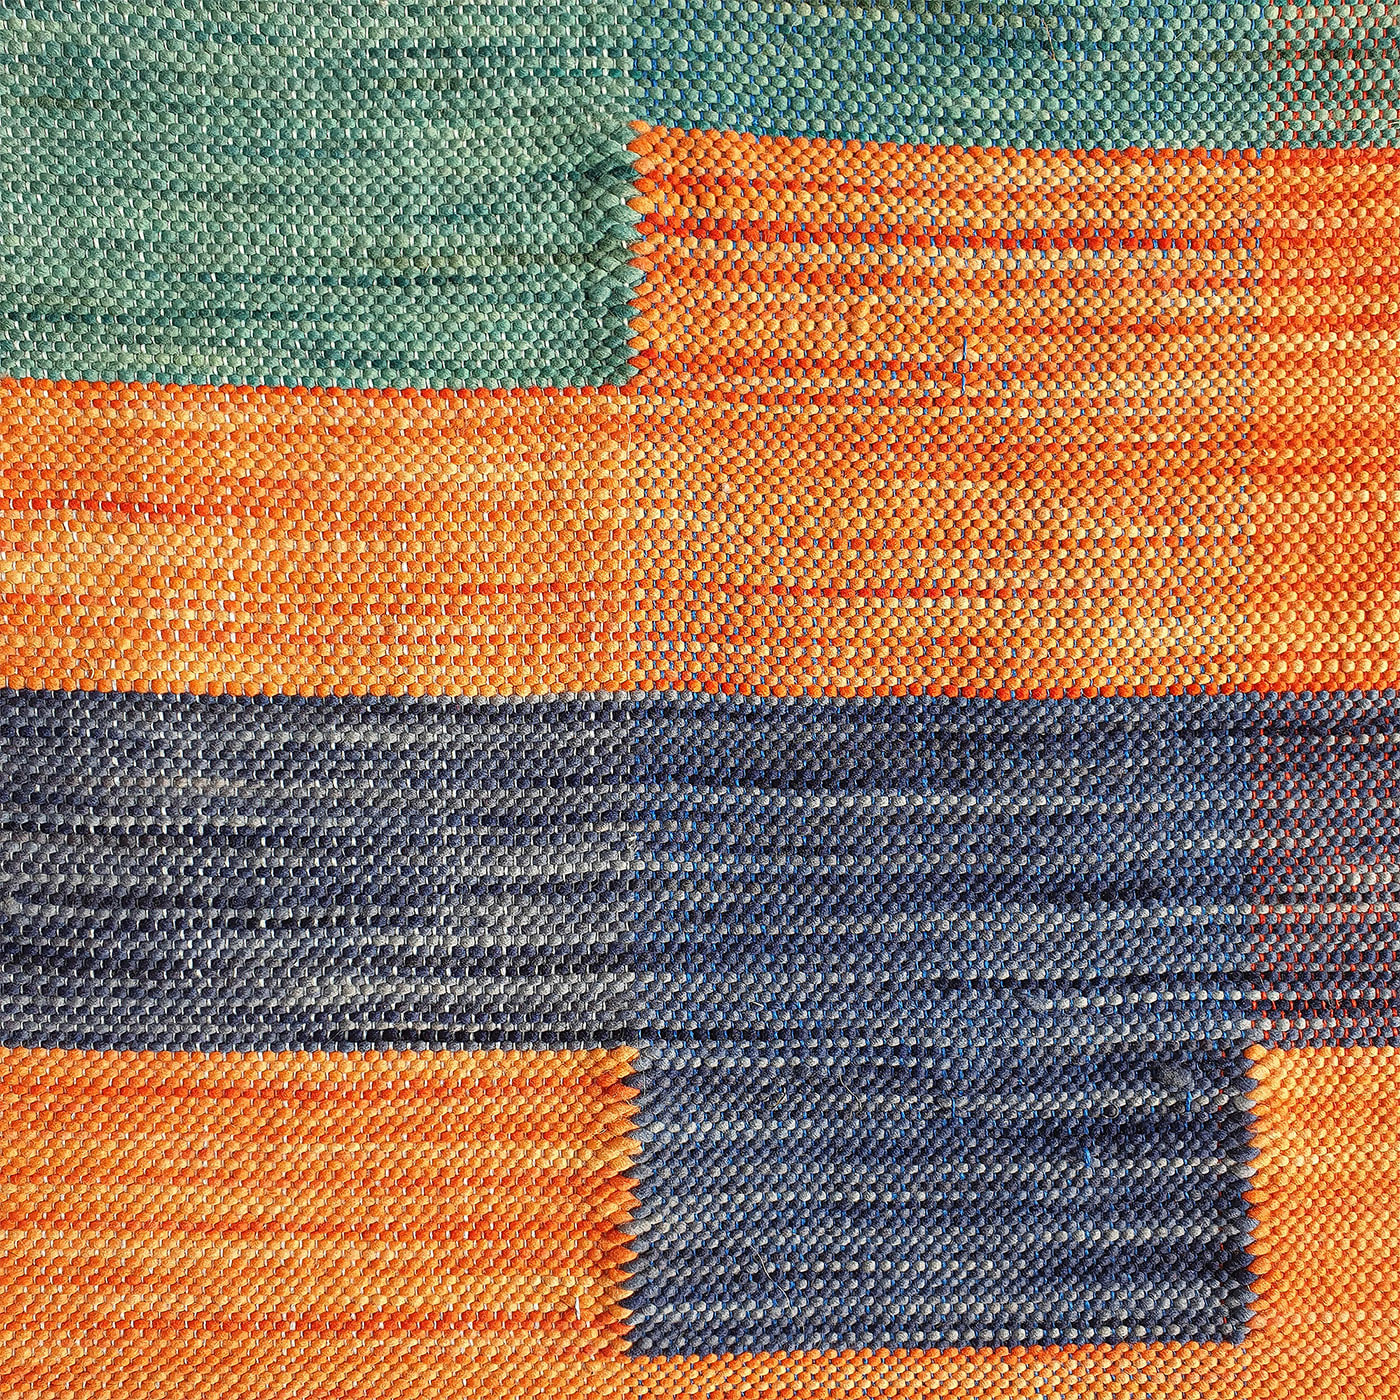 Reminder III Hand Woven Tapestry - Costantini Atelier